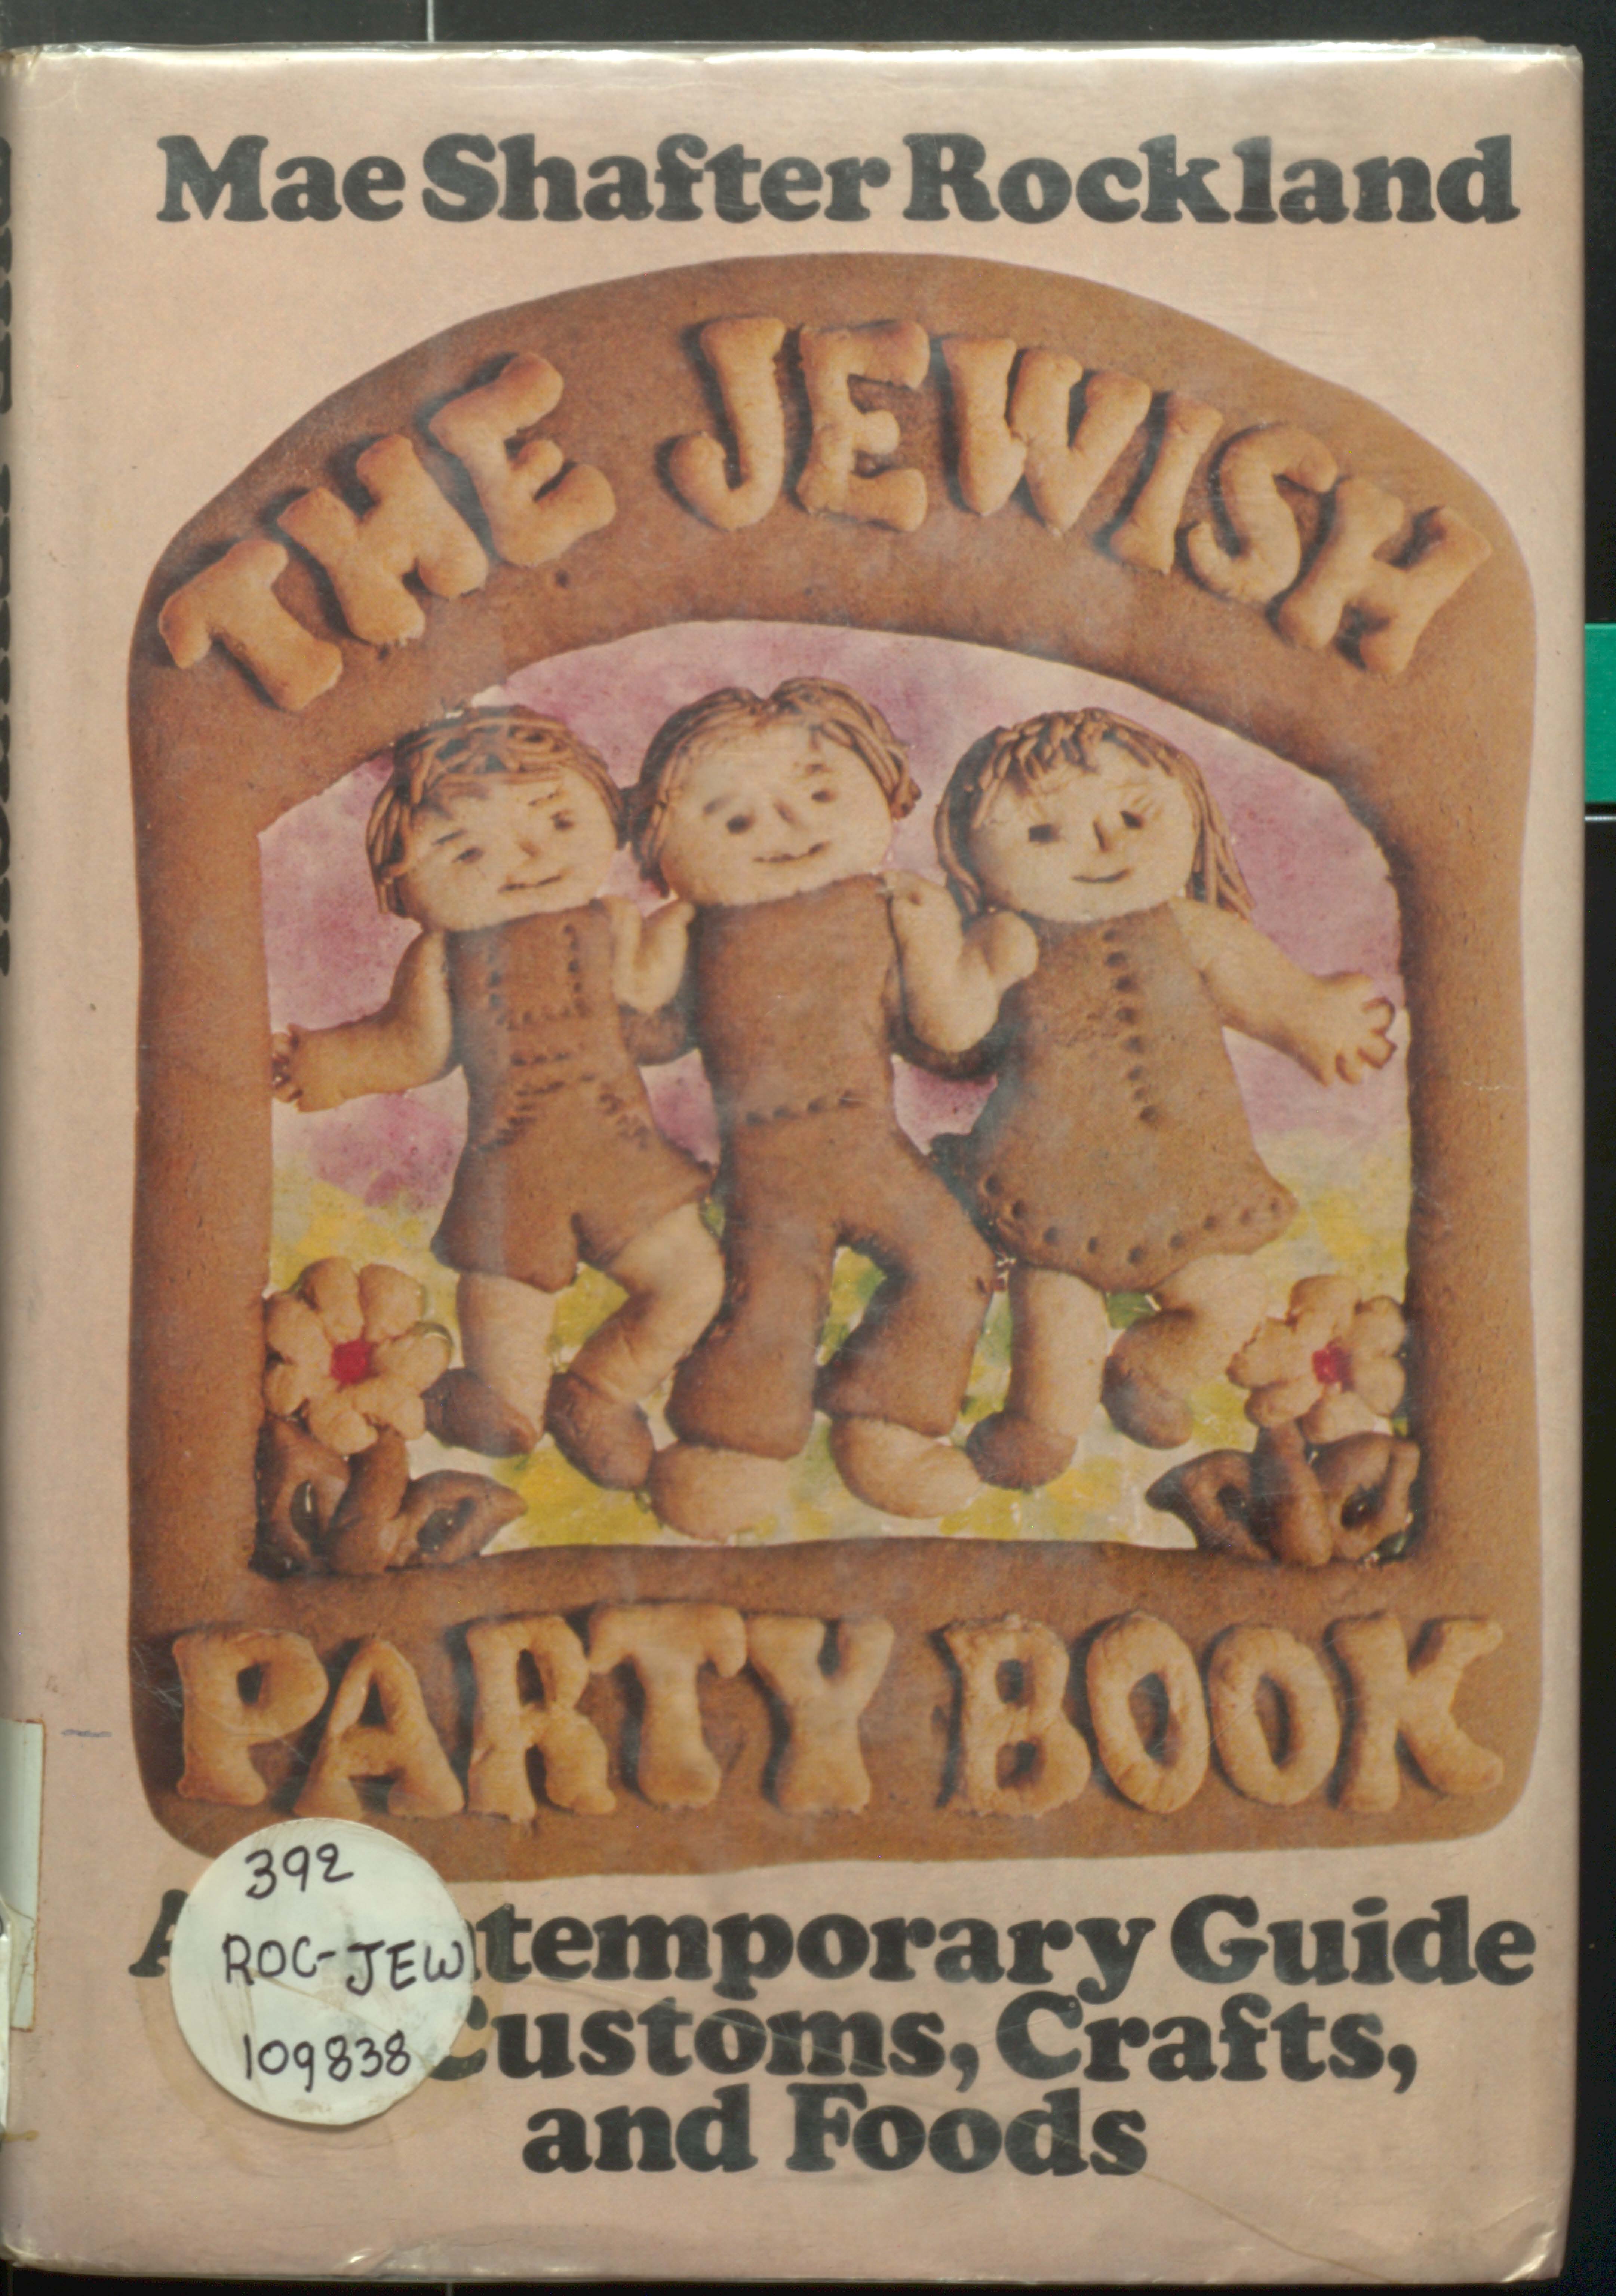 The jewish party book